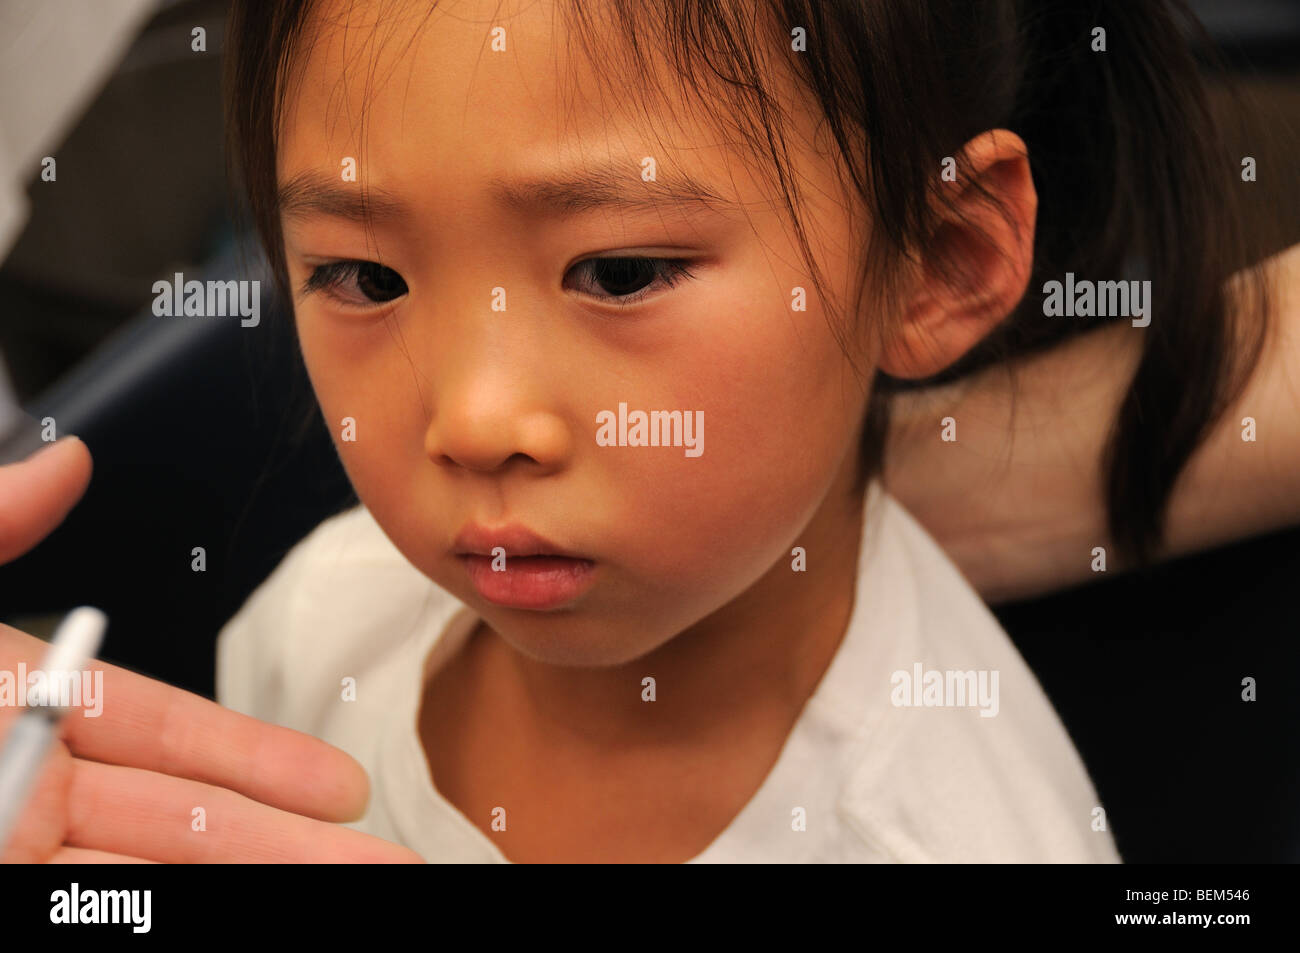 A 5-year-old girl is vaccinated for the 2009 H1N1 influenza, also known as the Swine Flu, with an intranasal vaccine. Stock Photo